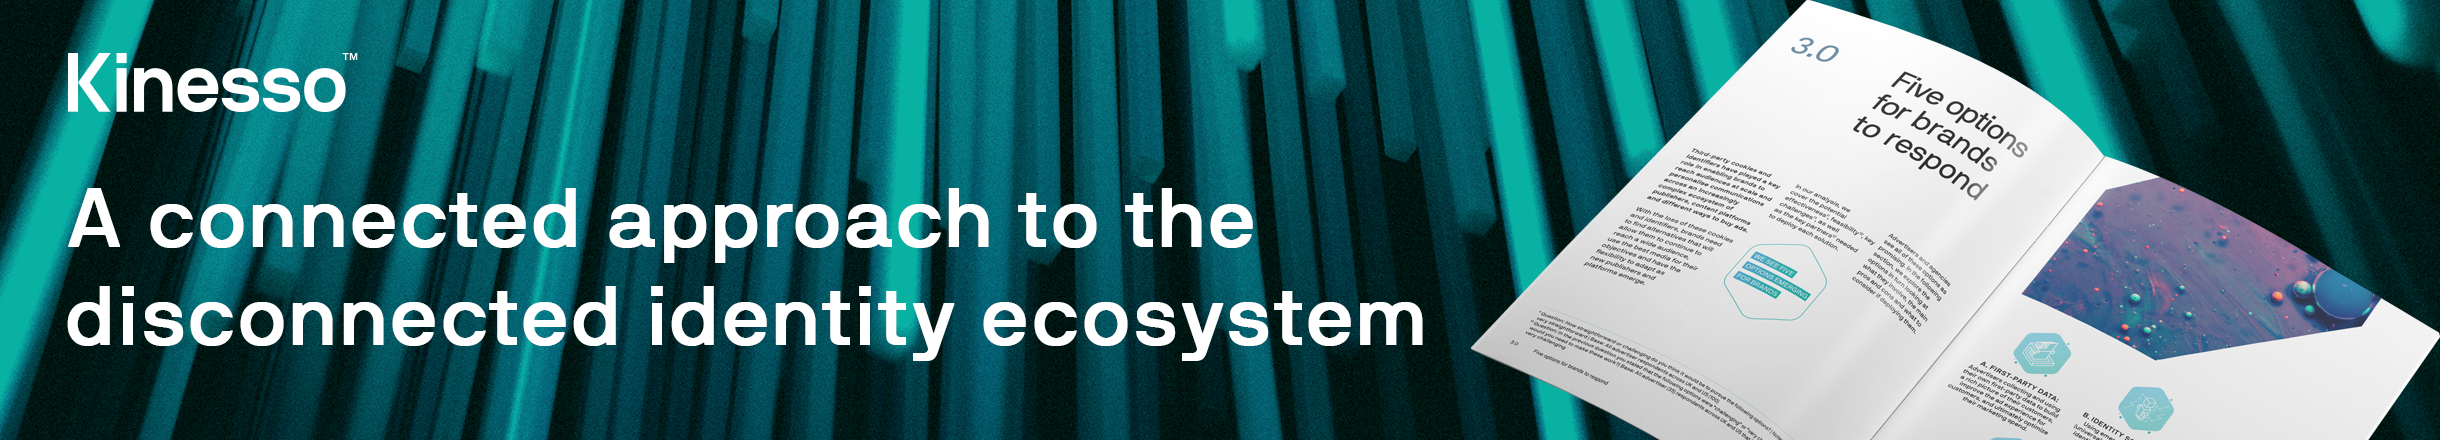 Download A Connected Approach to the Disconnected Identity Ecosystem